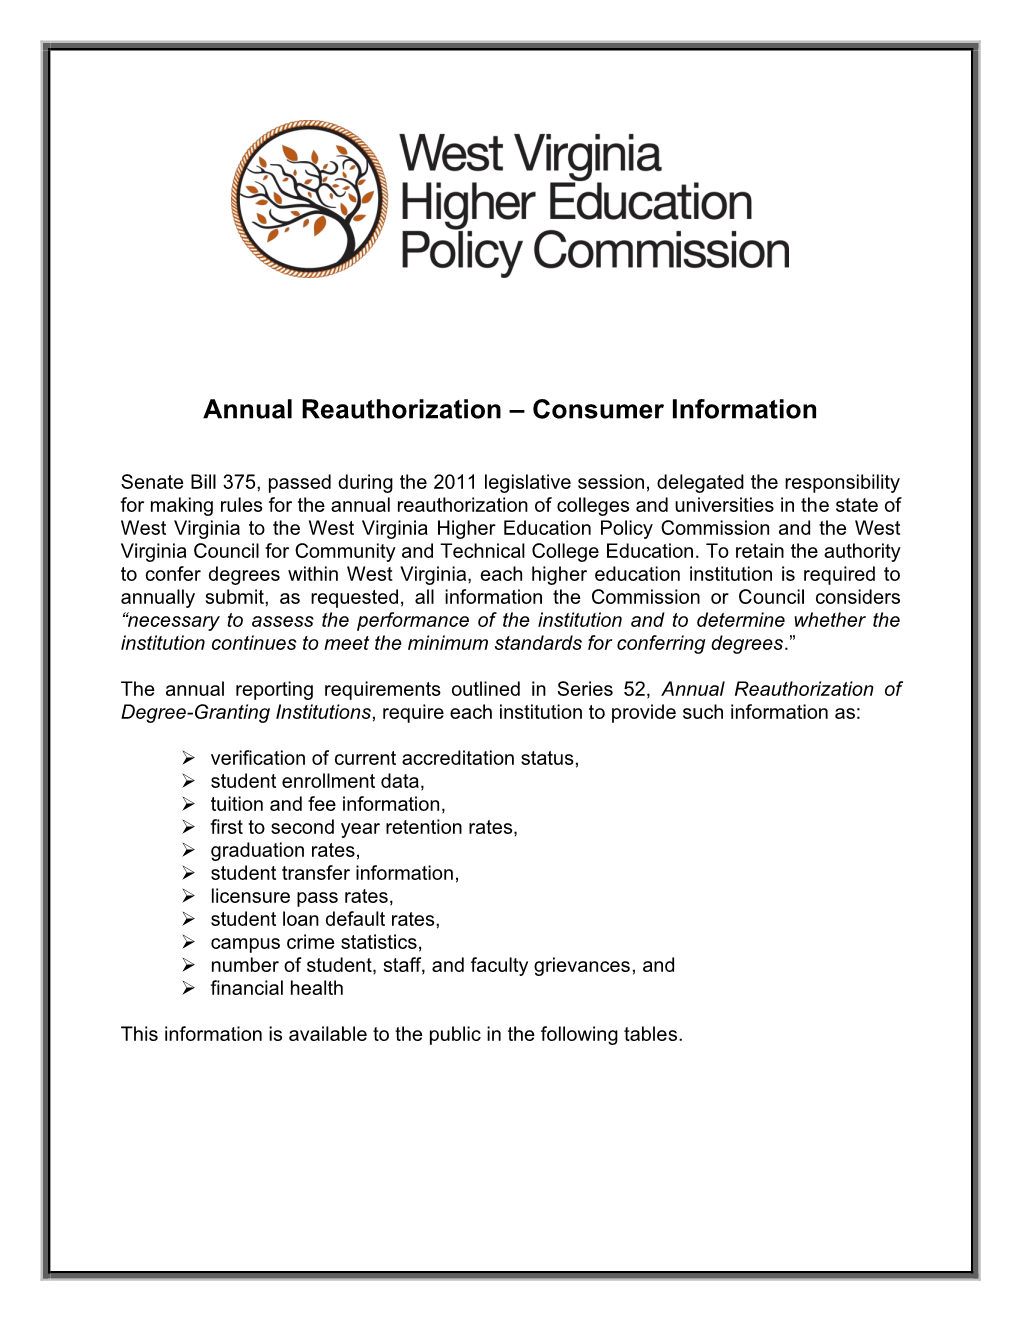 Annual Reauthorization – Consumer Information